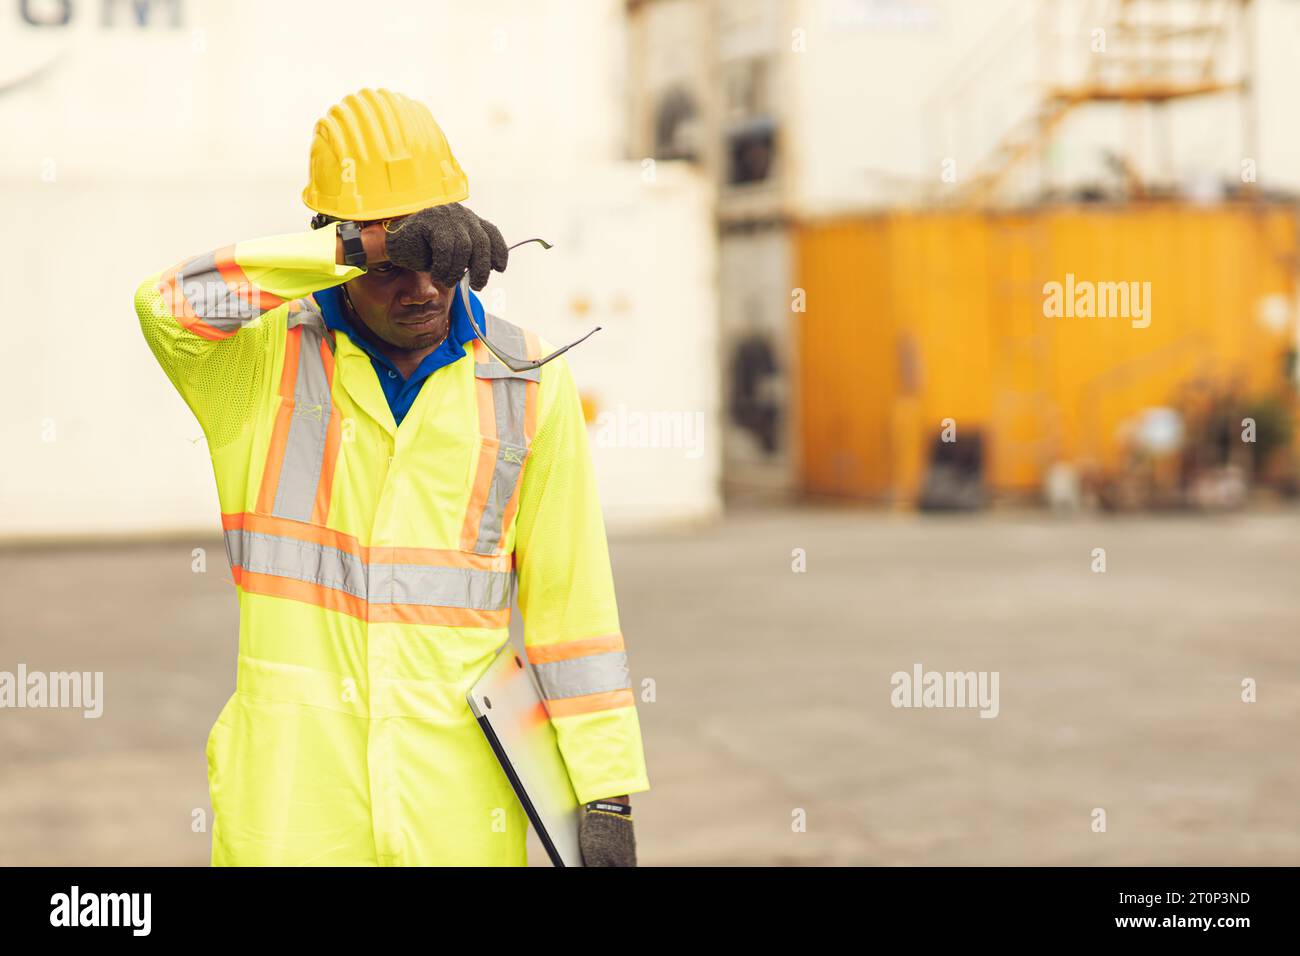 Tired stress exhausted worker sweat in hot day in summer working outdoor in port shipping contrainer yard, Black African race people. Stock Photo